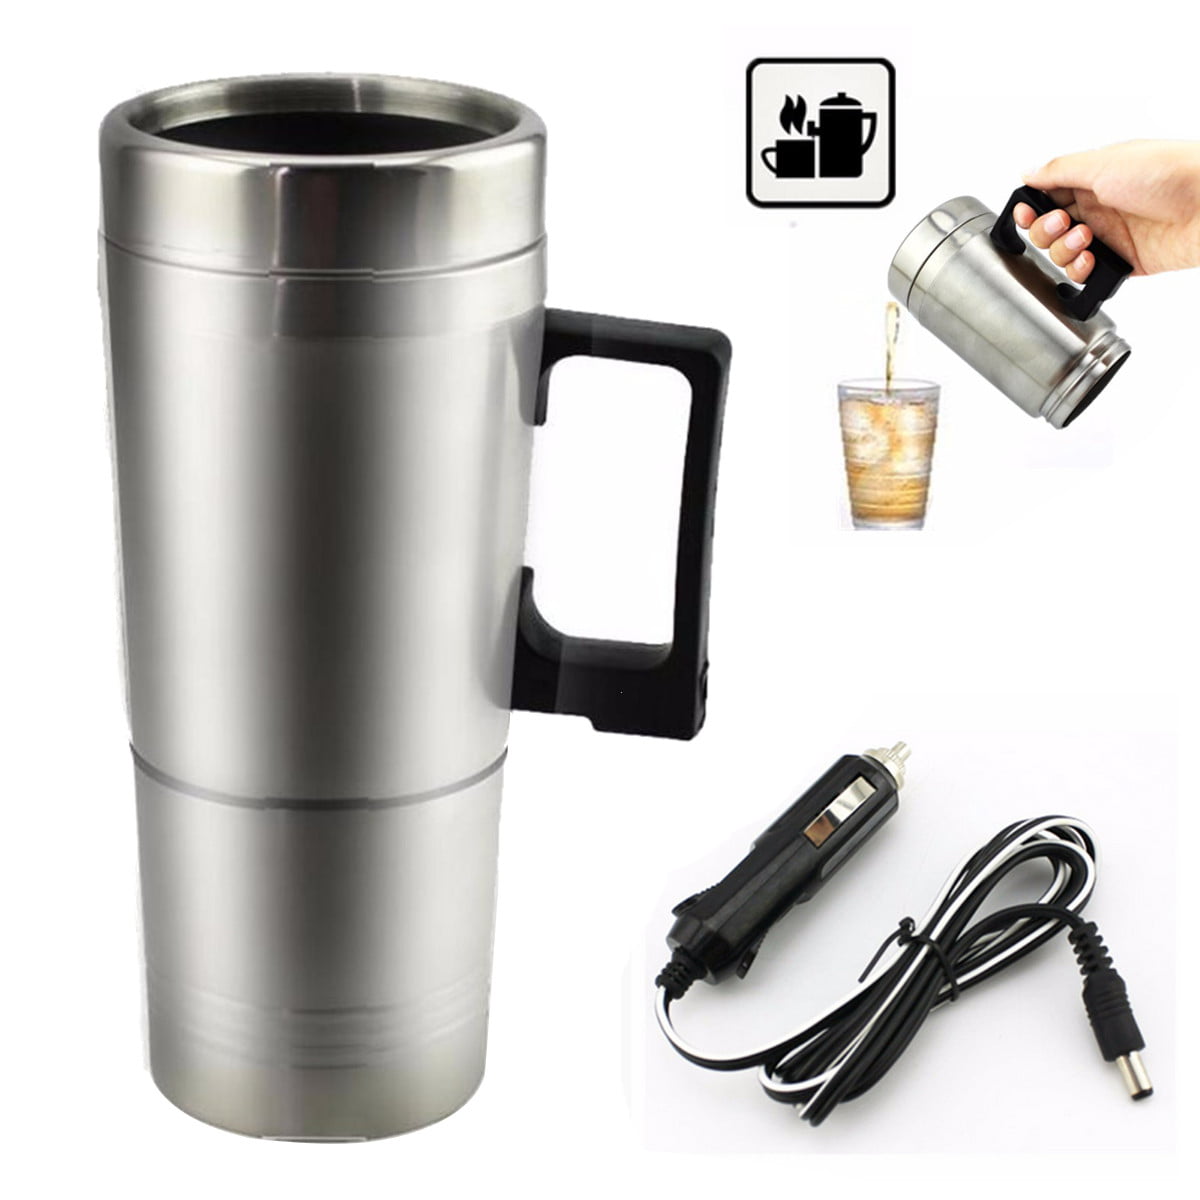 Car Cup 12v Heating Coffee Stainless Travel Heated Thermos Mug Steel Tea Auto 